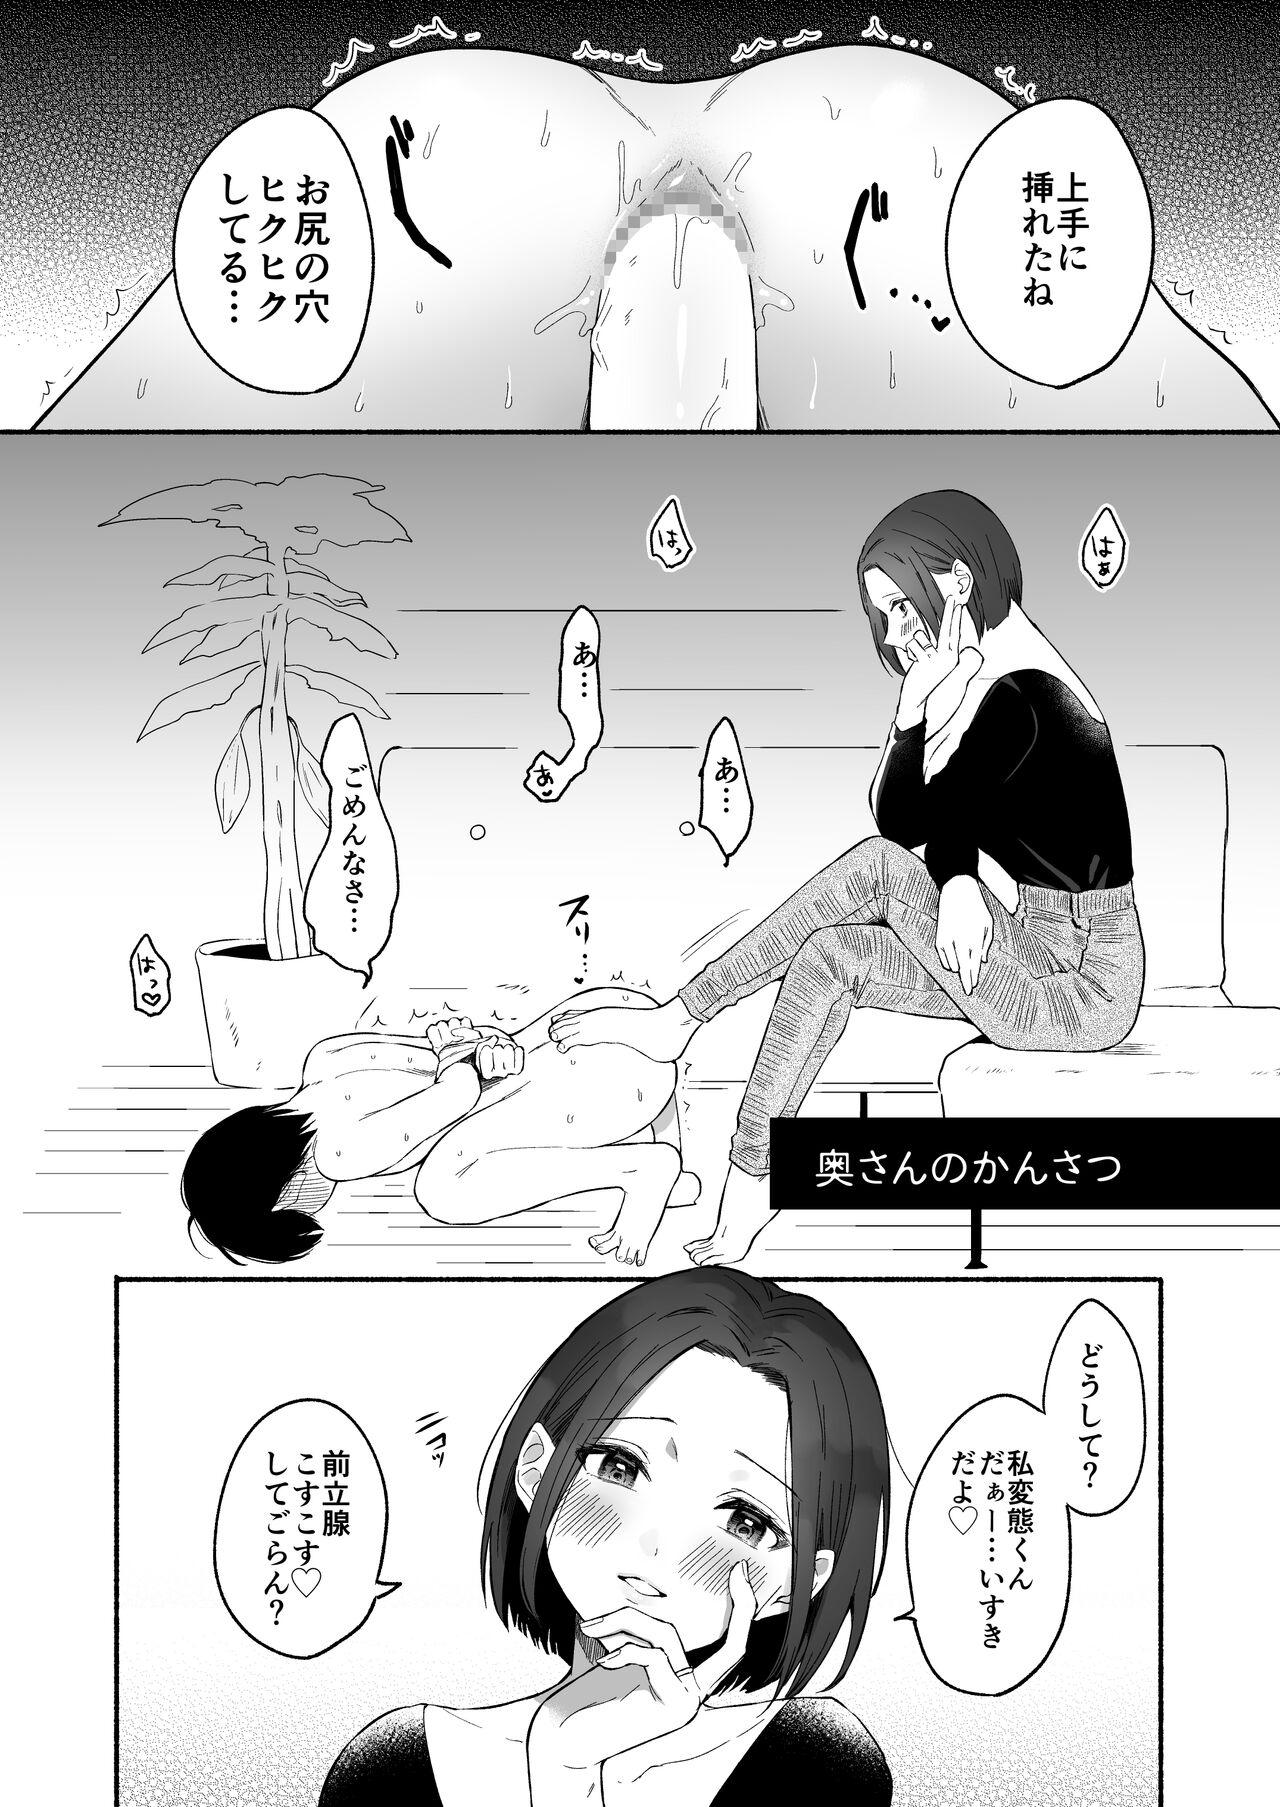 Clothed Sex Chilukuni Box Vol. 1 - Original Doggystyle - Page 11